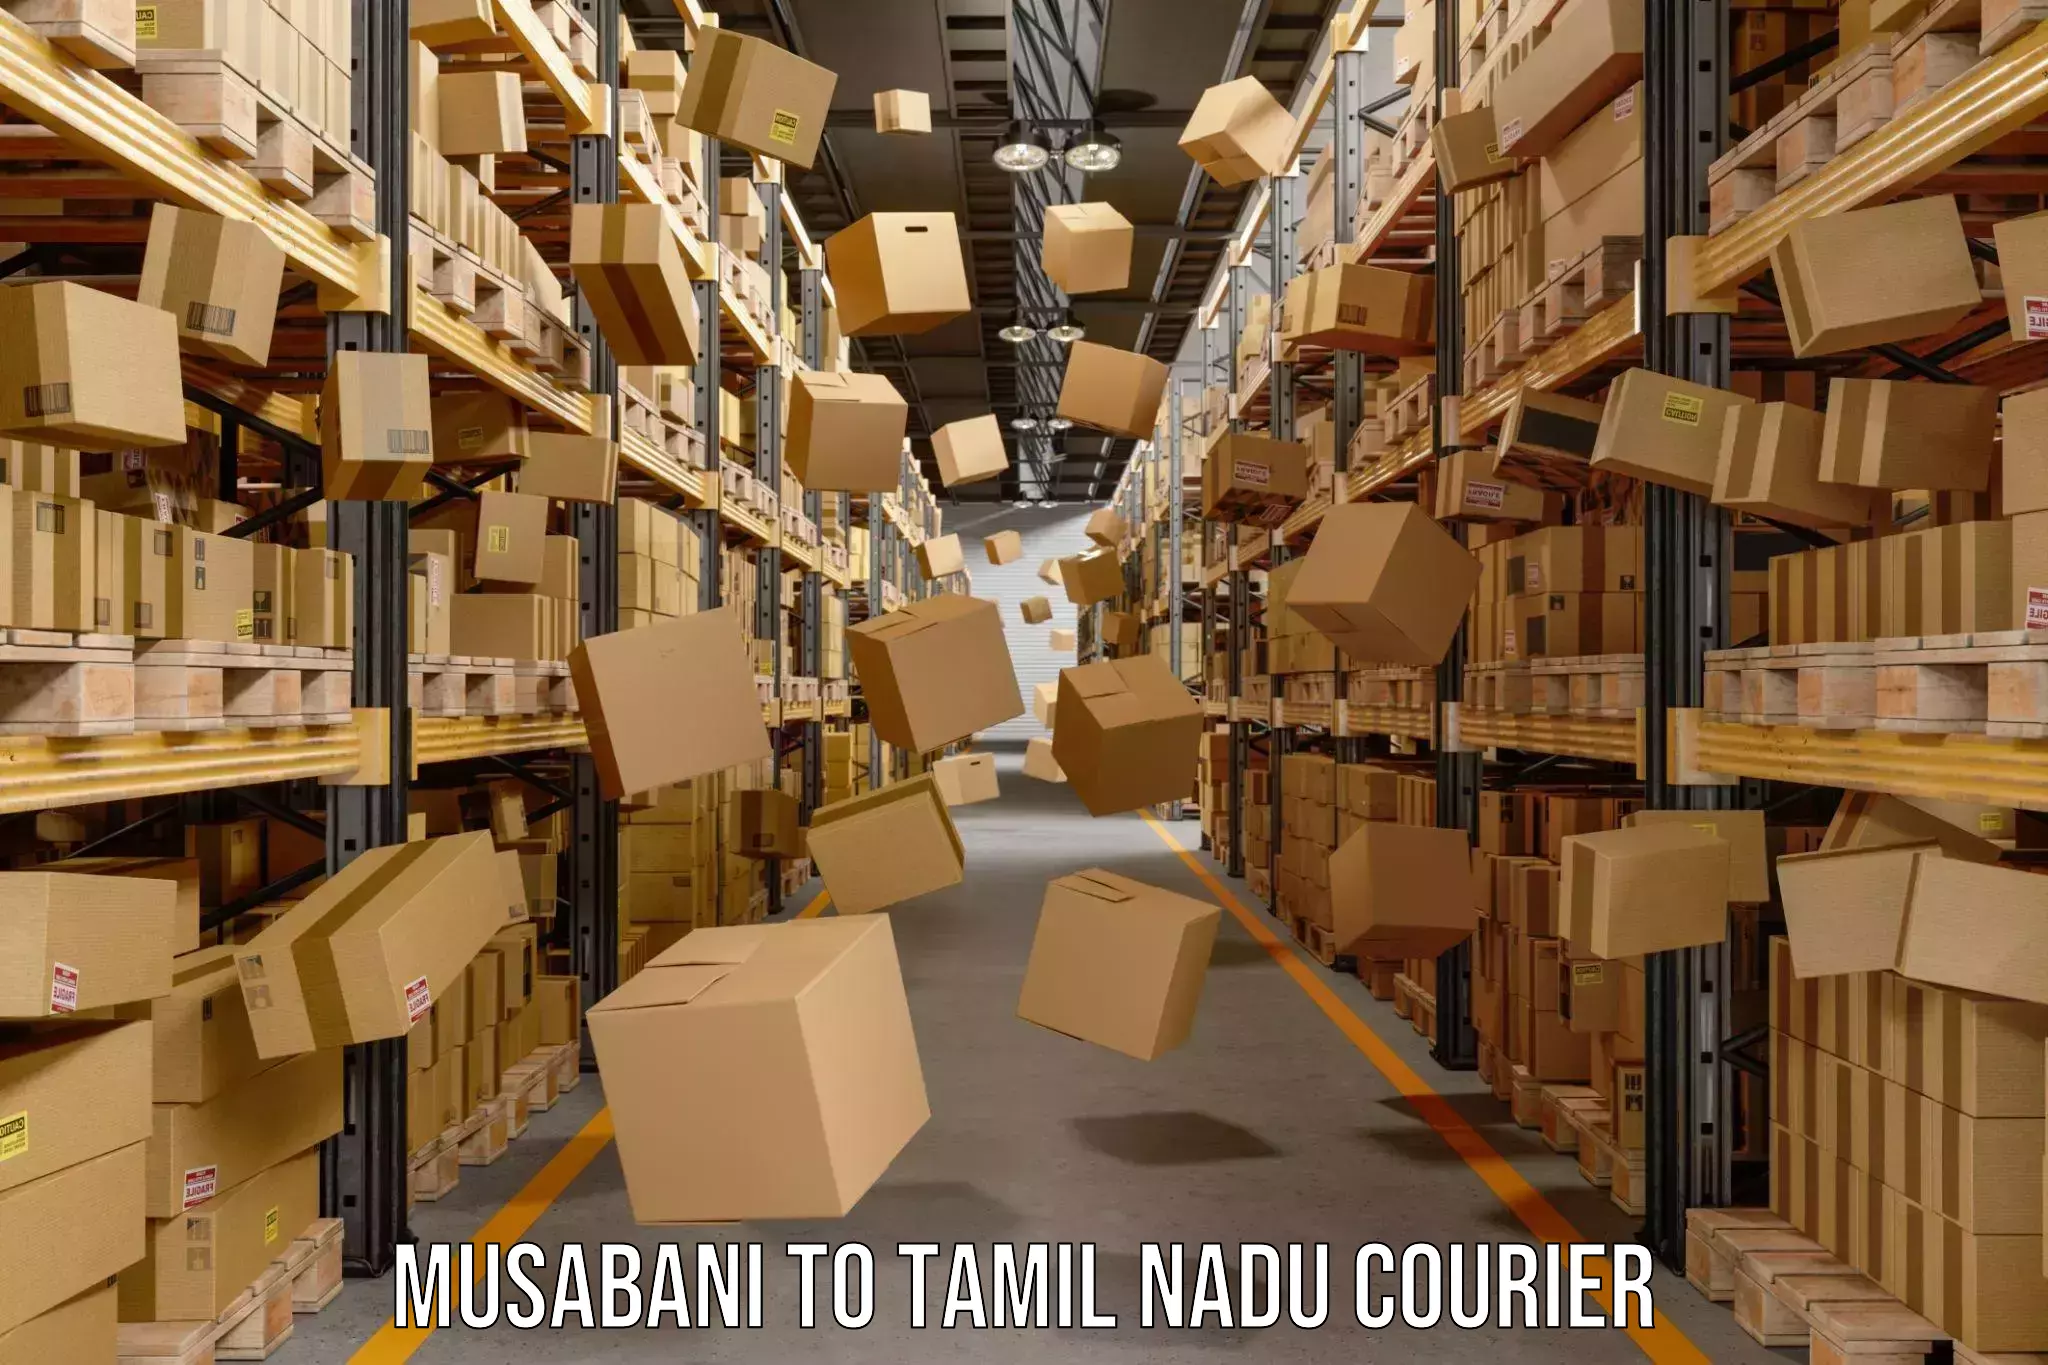 Courier service efficiency Musabani to Shanmugha Arts Science Technology and Research Academy Thanjavur